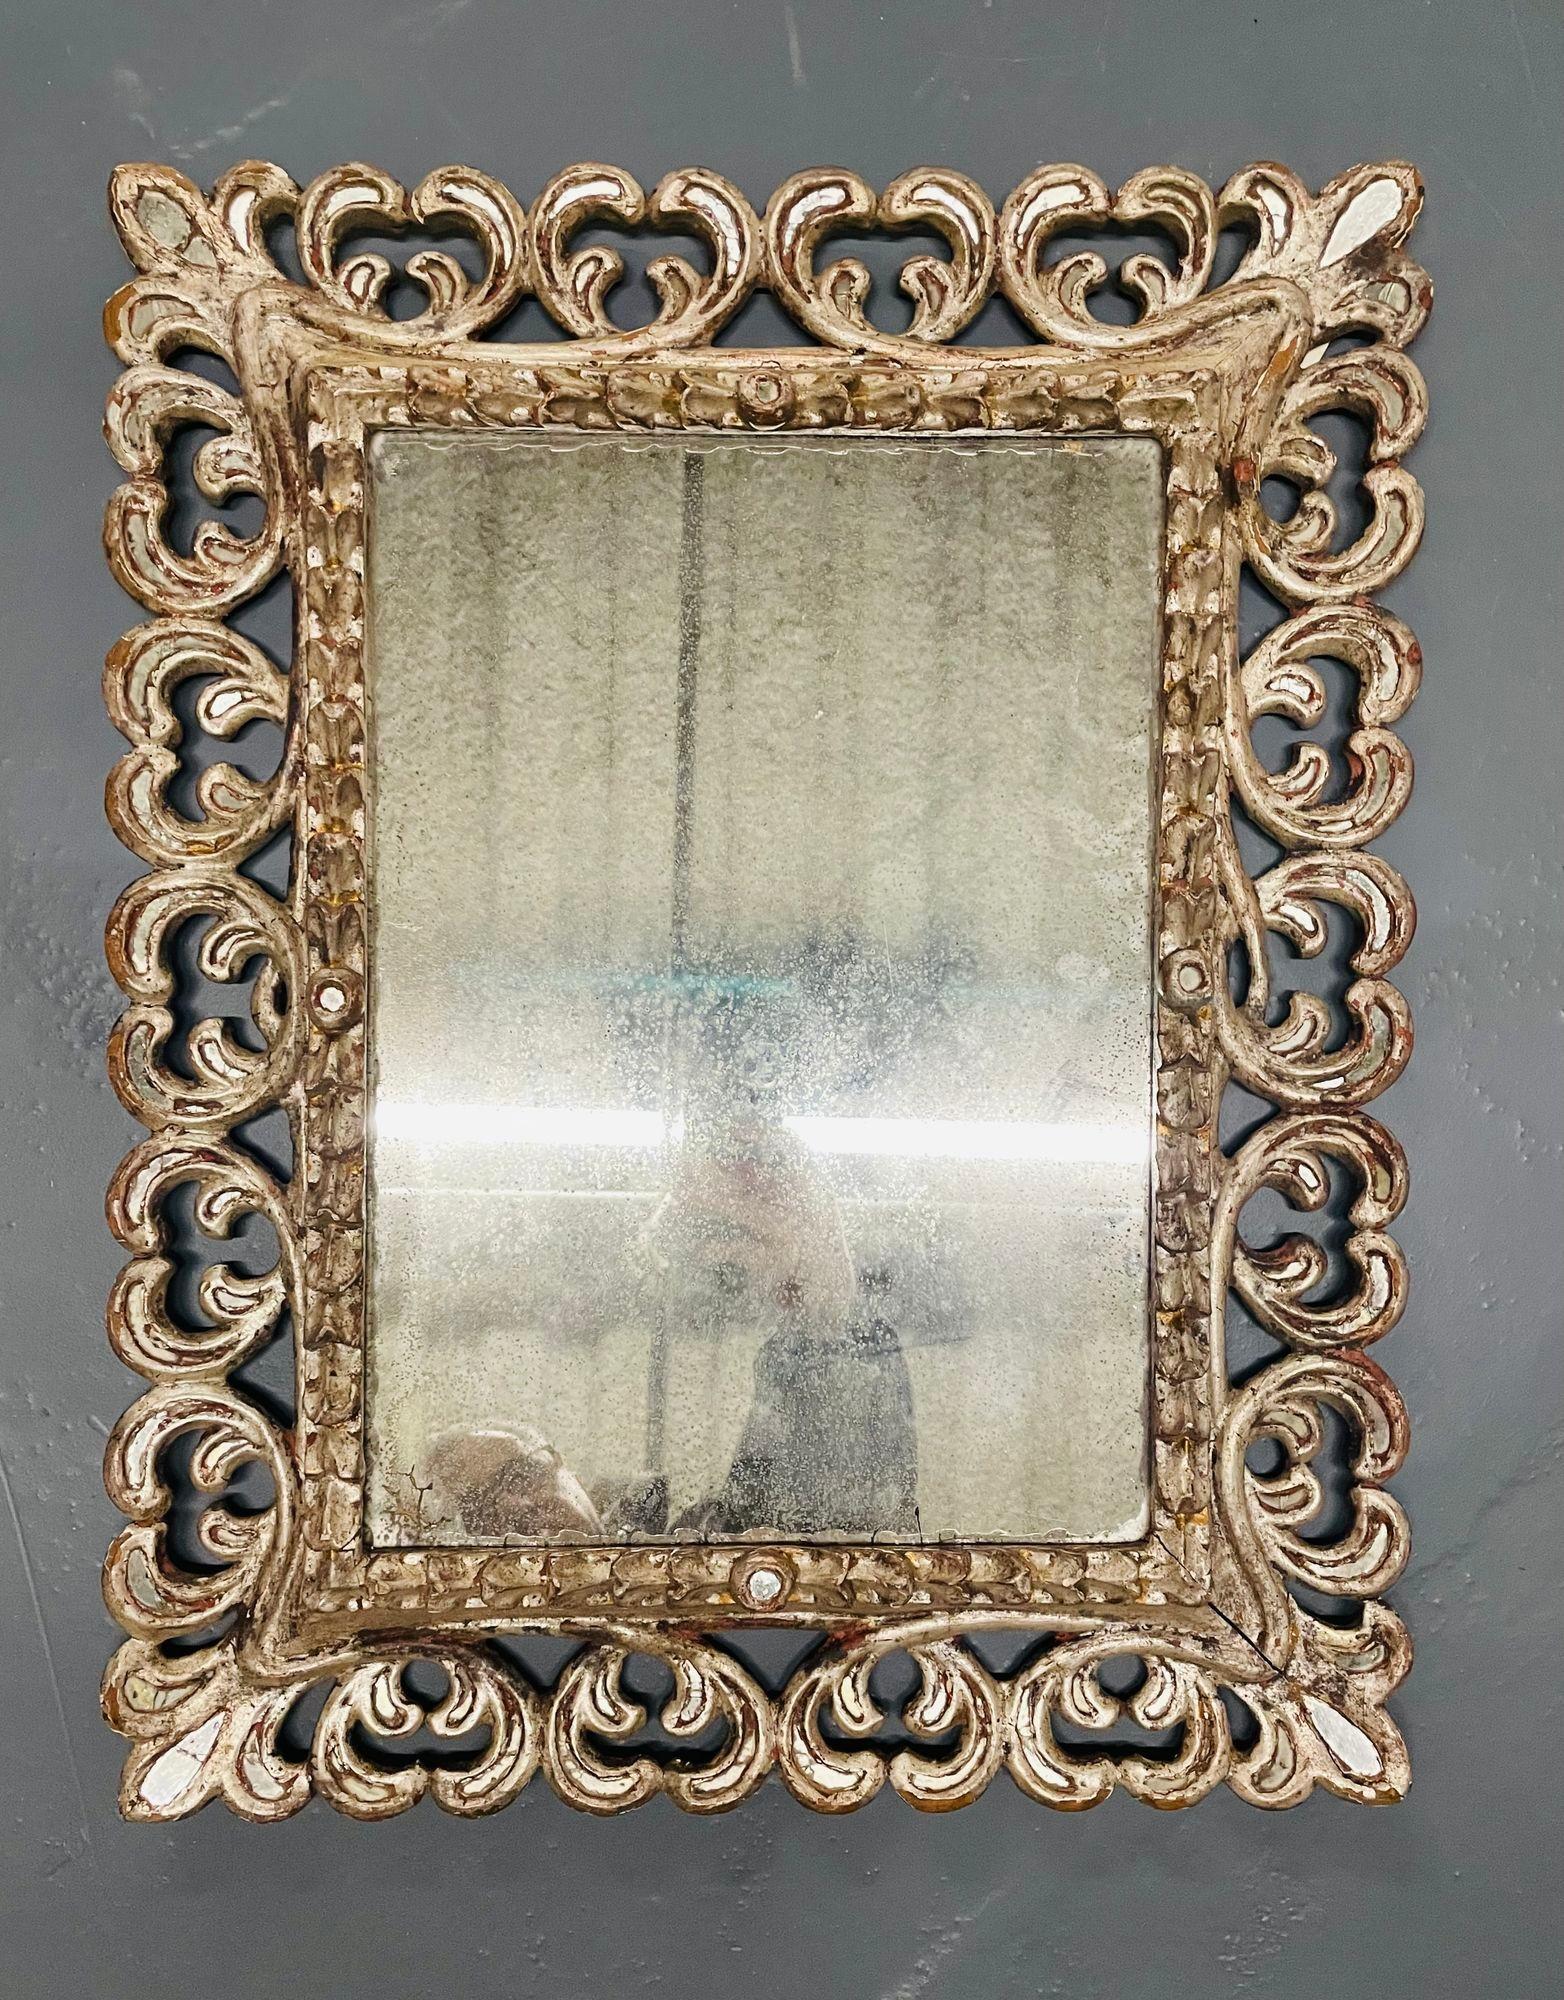  French Hollywood Regency Silver Leaf Wall / Console / Pier Mirror, Distressed
 
A Rococo French silvered leaf wall or console mirror. This finely carved frame having all over silver leaf decoration with scroll and leaf design having small bits of